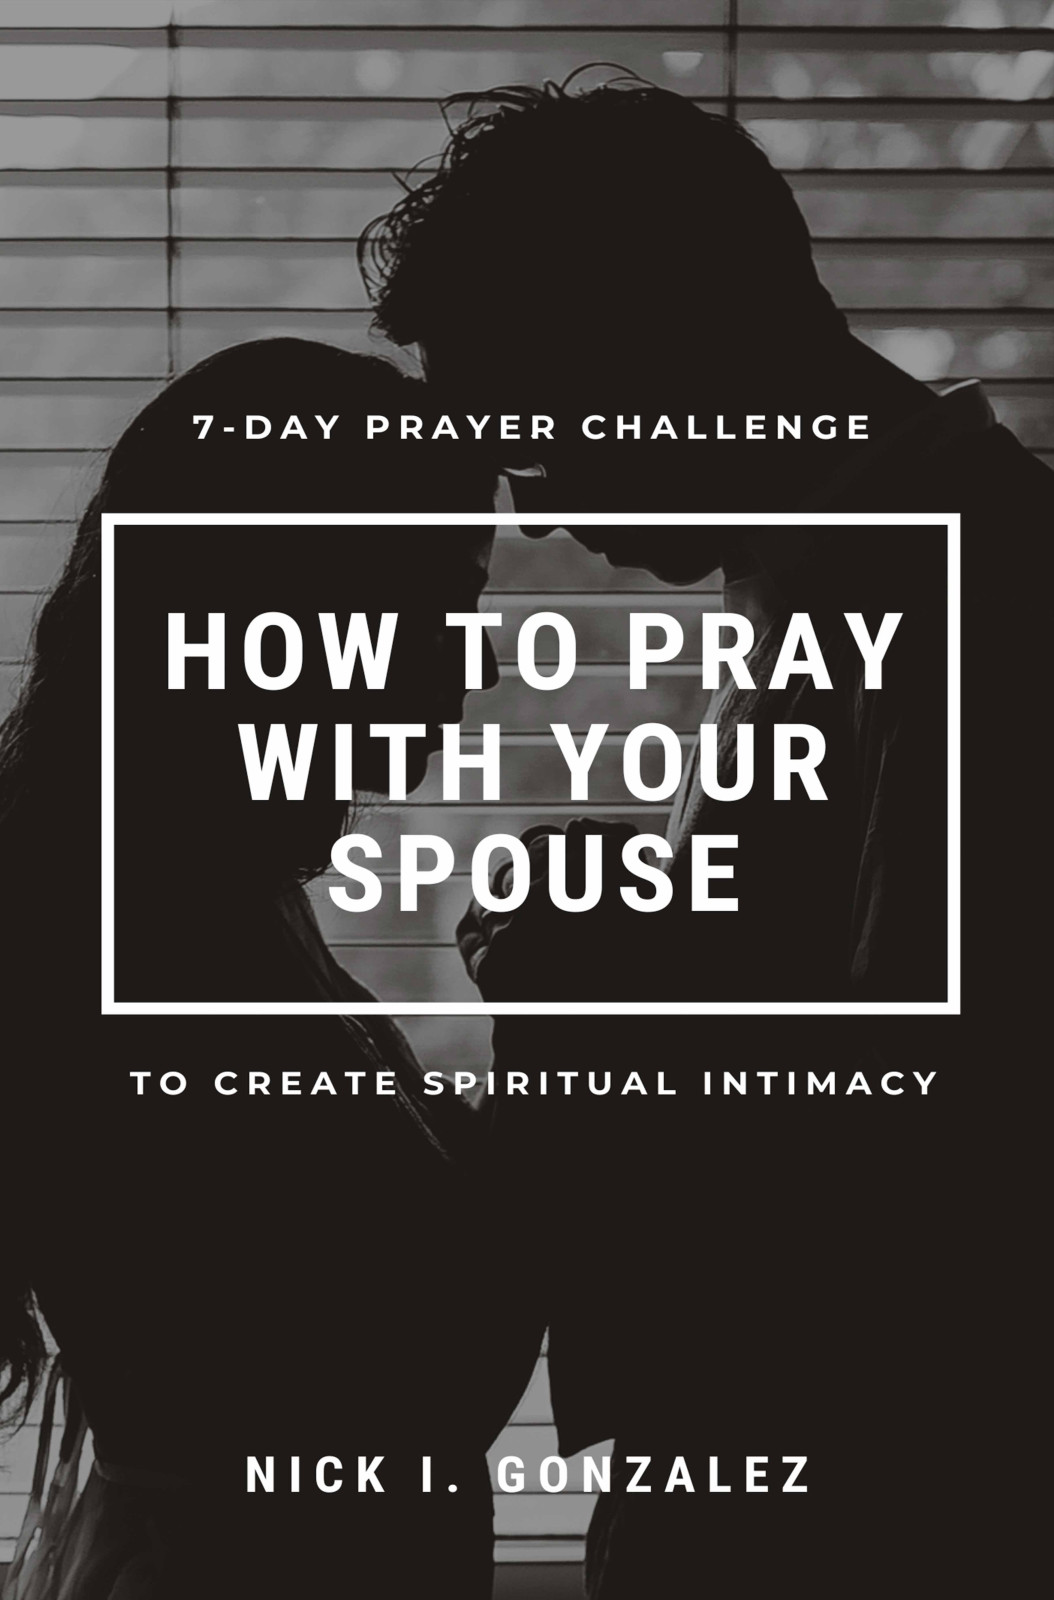 Three Reasons Why Your Spouse May Not Want to Pray with You.